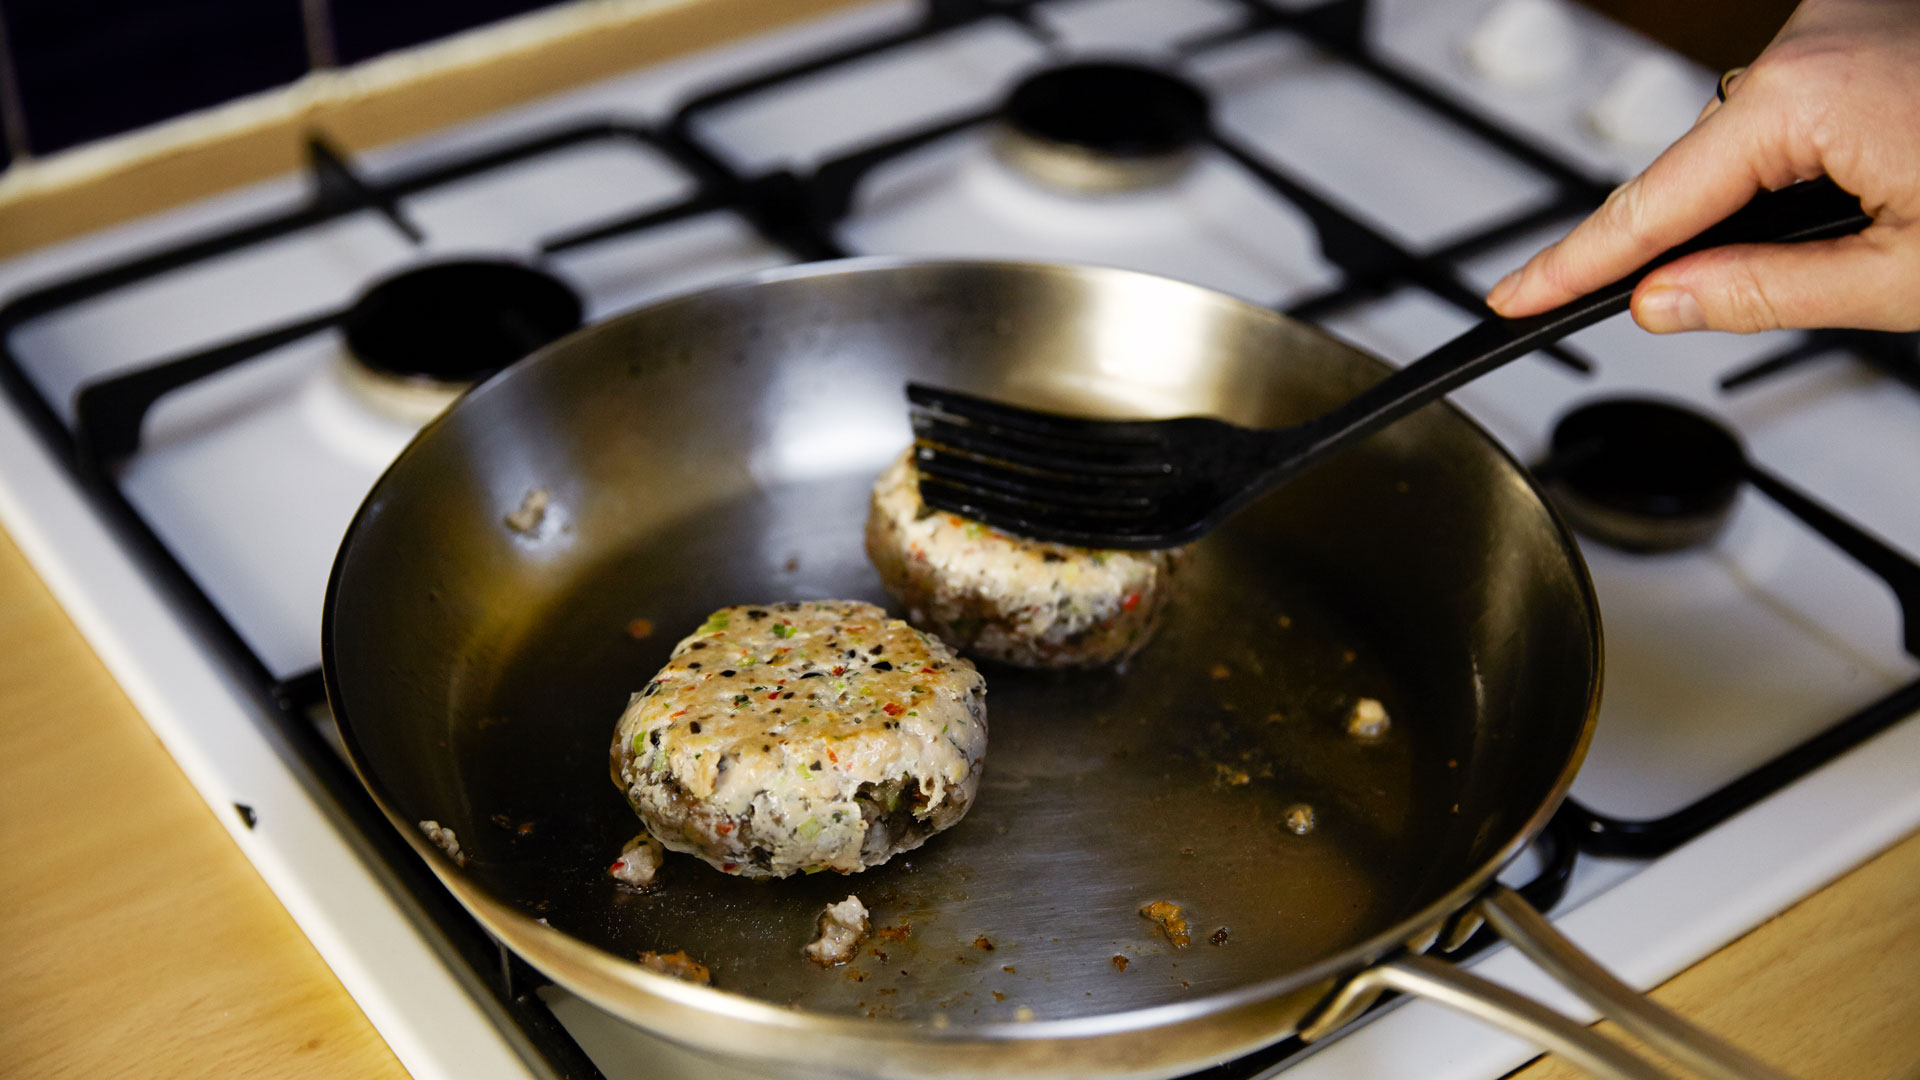 Karen Arkell fries her tuna burgers to go with the Mustard Beetroot Salad recipe.